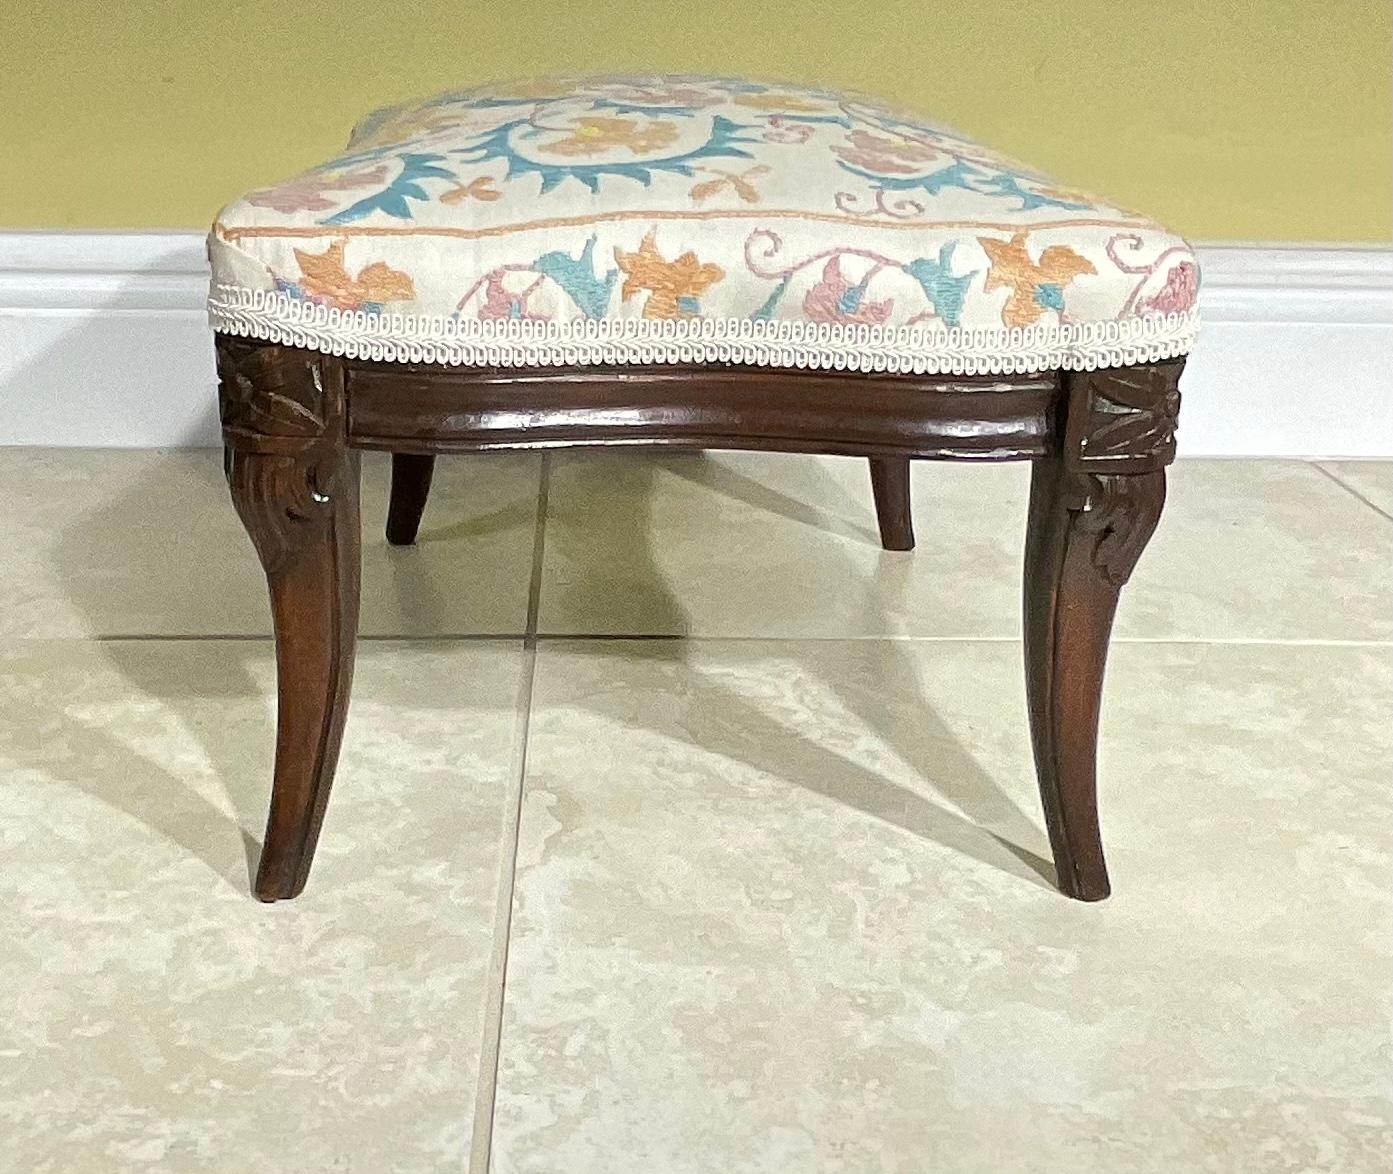 Antique Hand Carved Suzani Embroidery Foot Stool In Good Condition For Sale In Delray Beach, FL